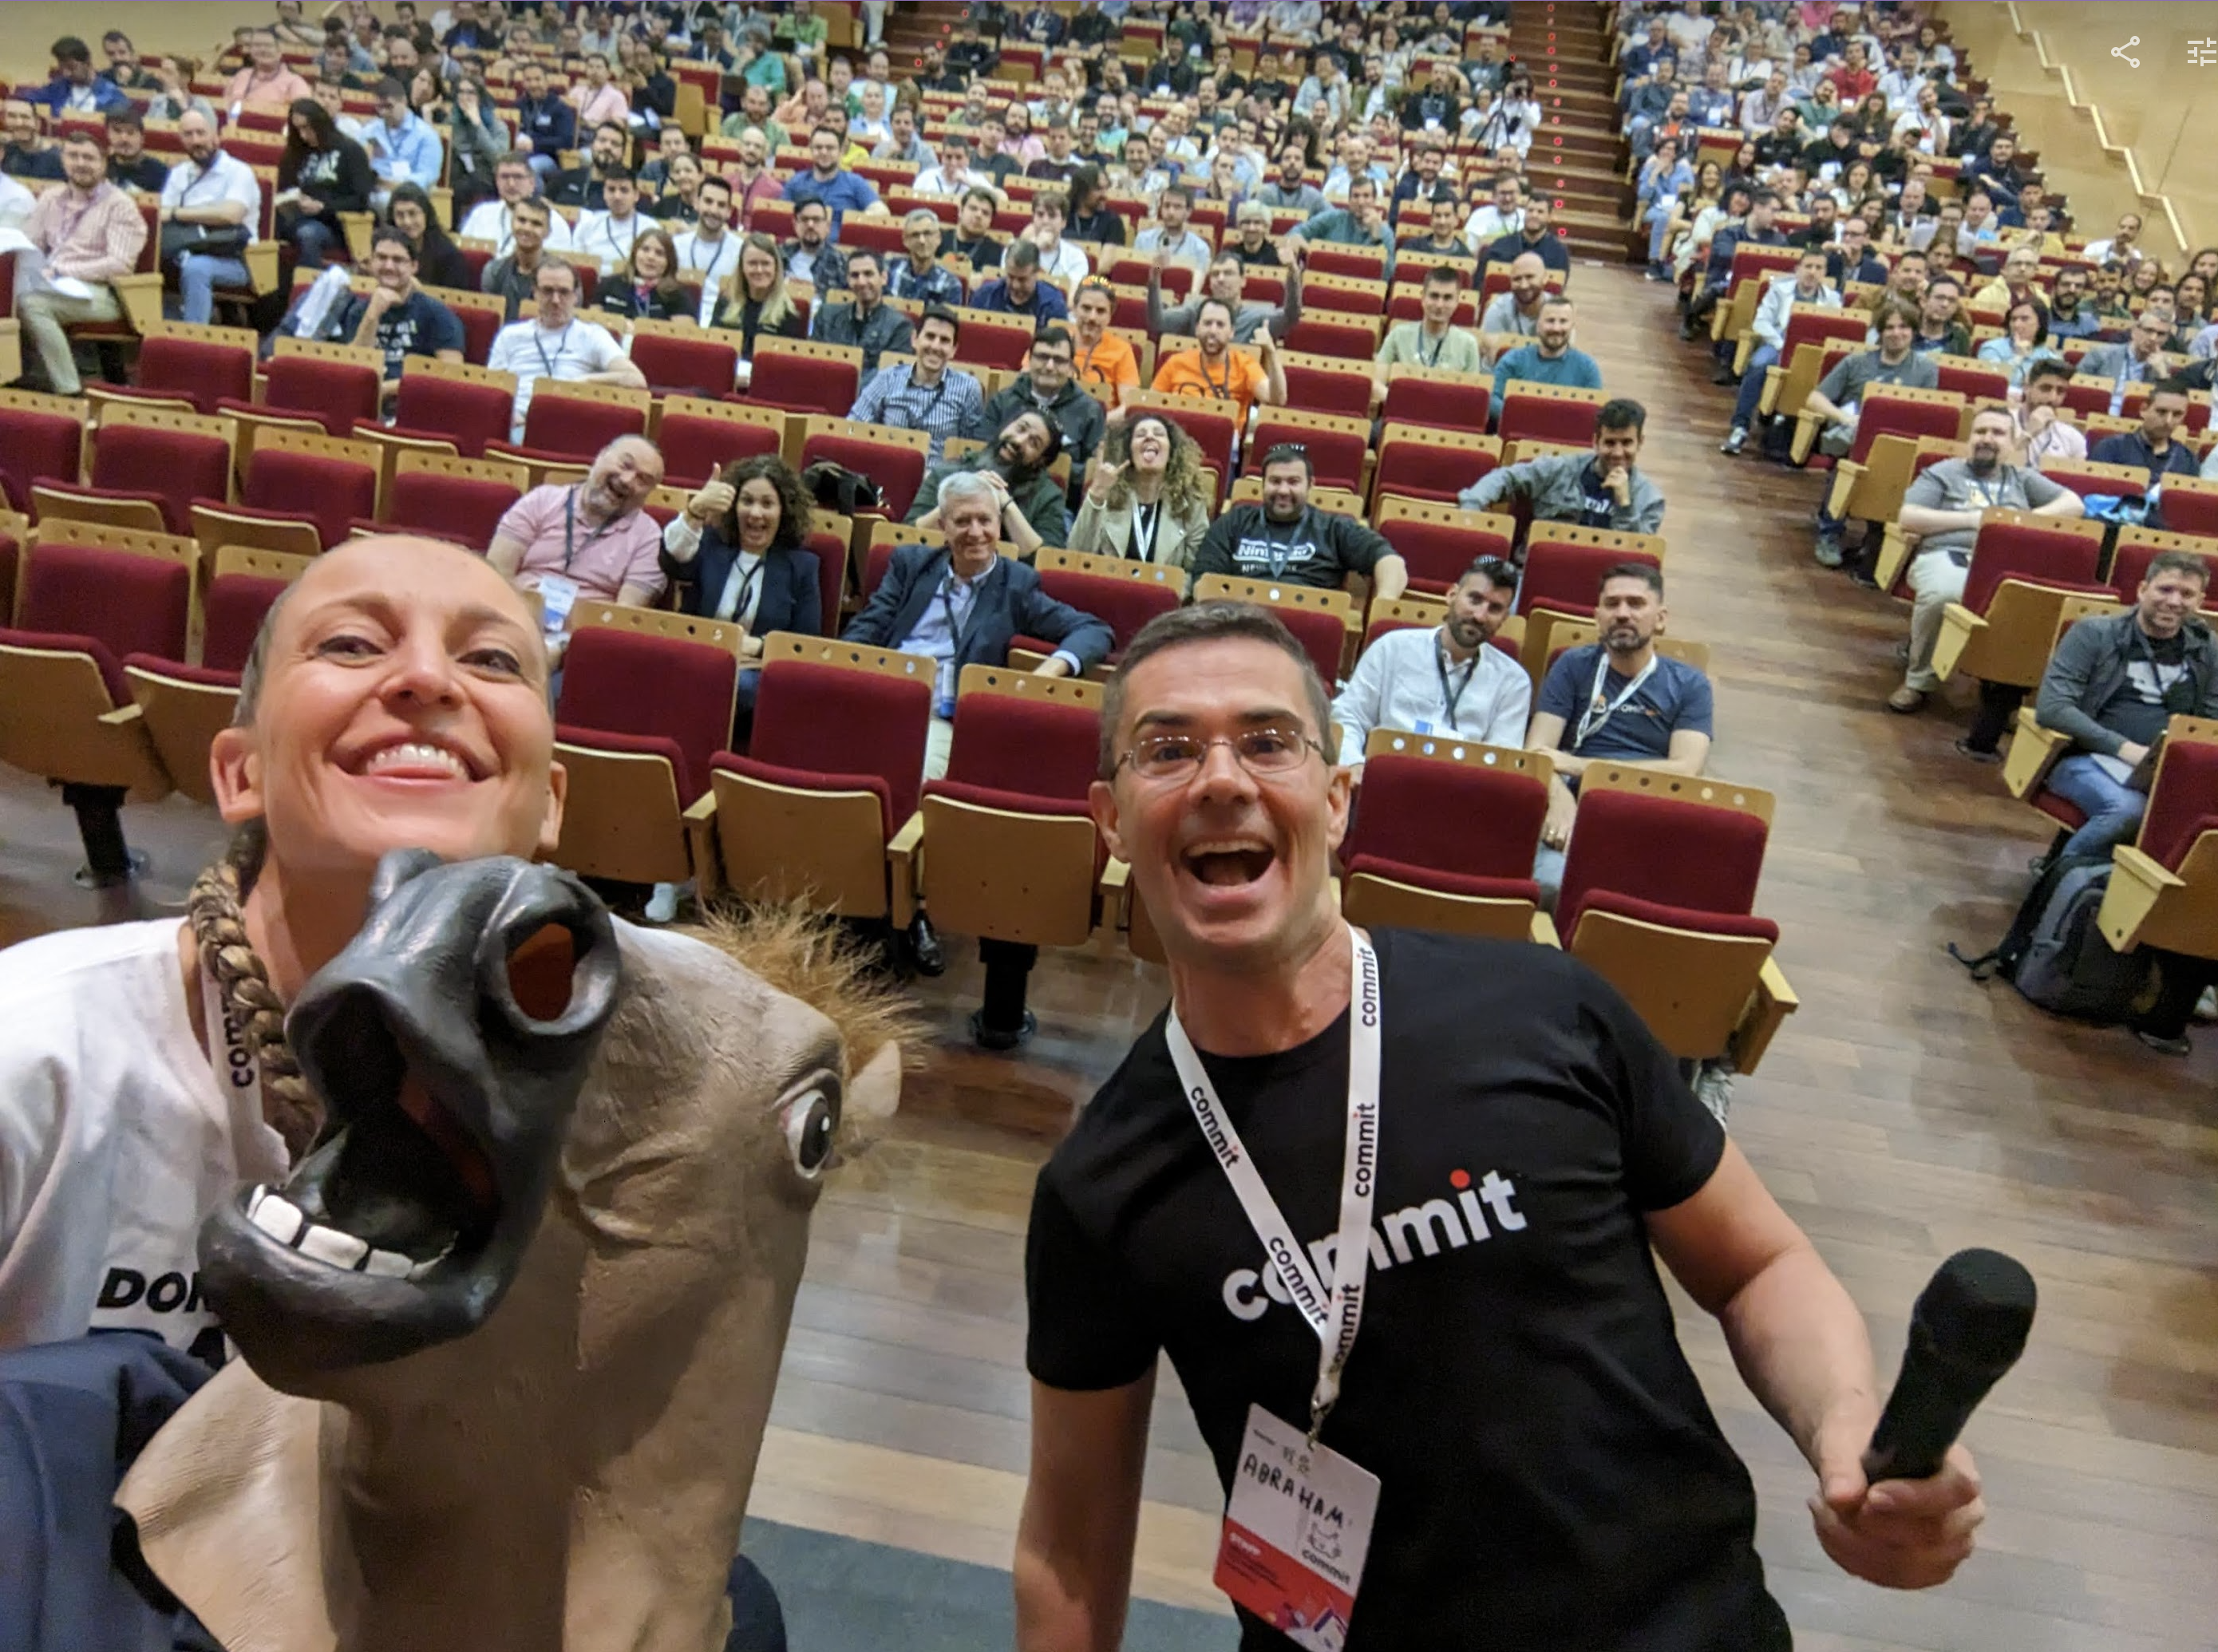 A selfie taken during the keynote, with the auditorium two thirds full of people and Laura, Abraham and Nacho on stage, smiling. Nacho is wearing a horse mask, but under that, there is a smile too.